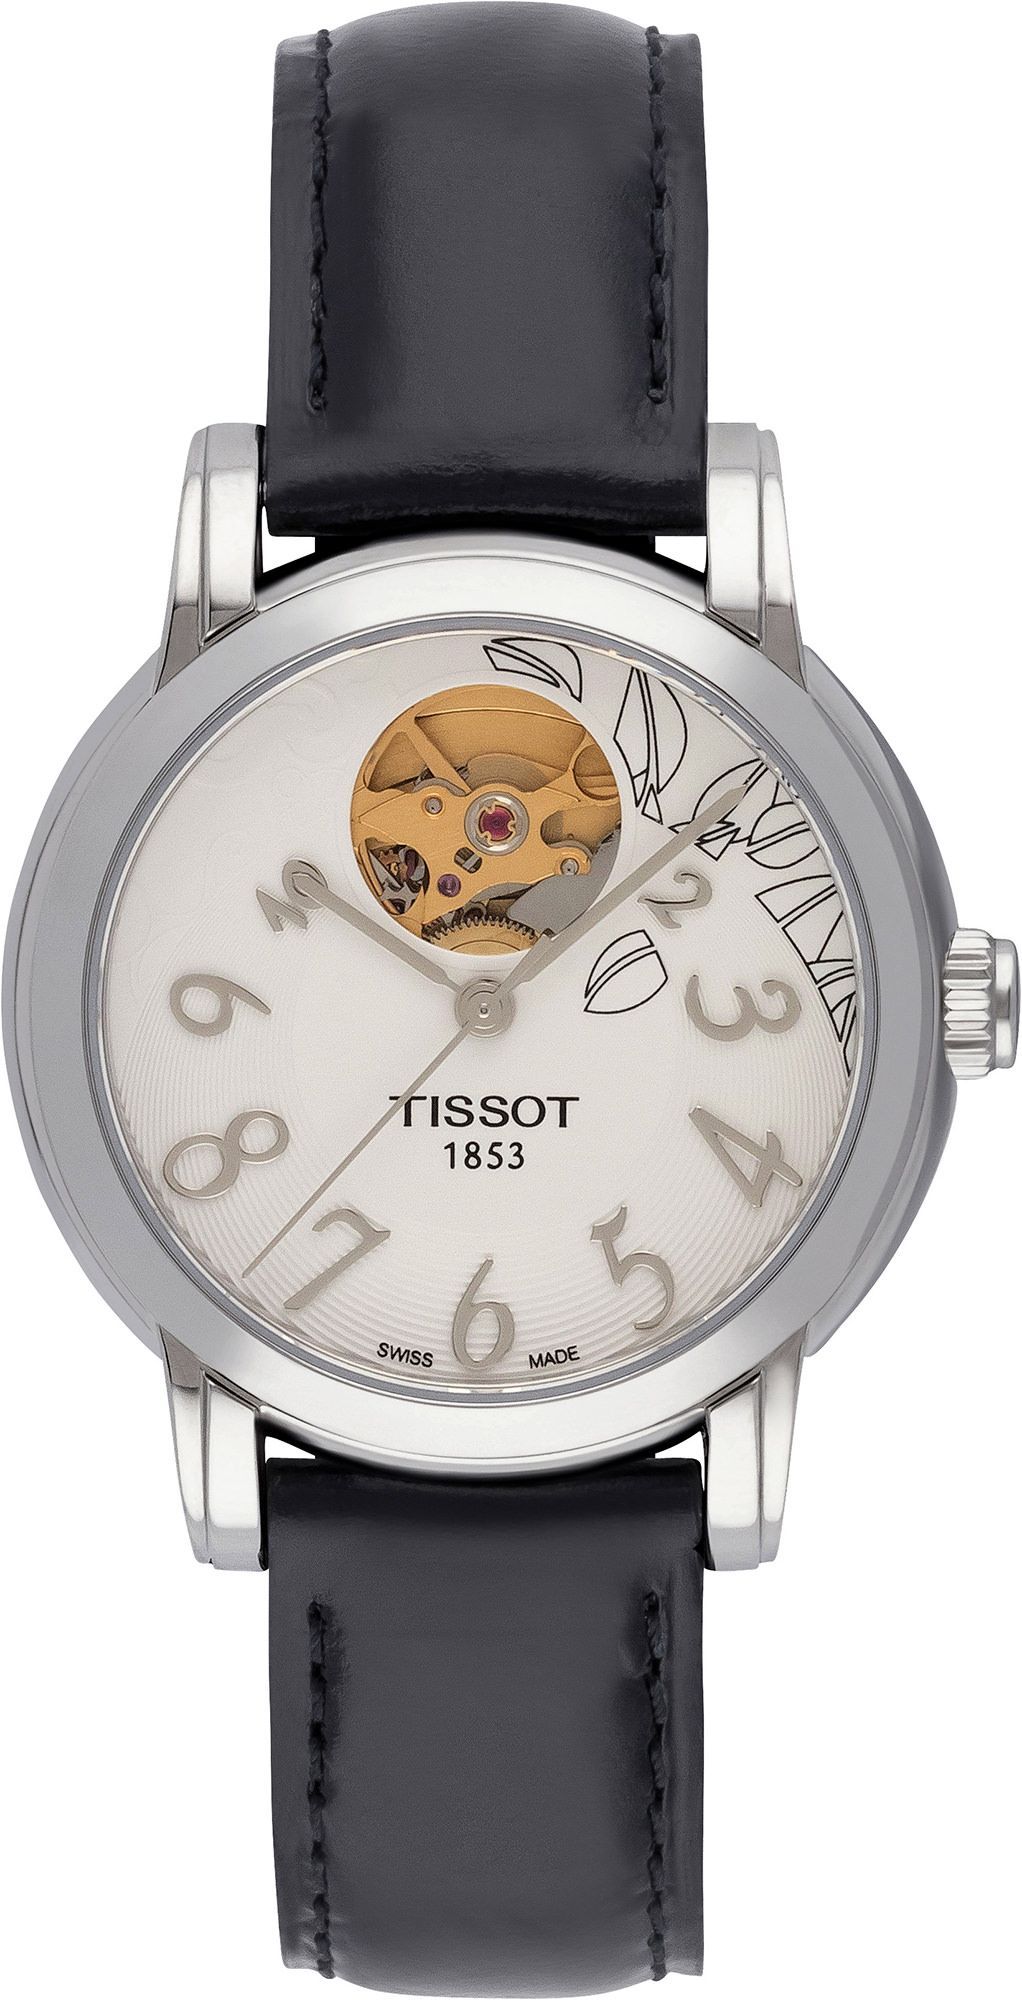 Tissot Lady Heart Automatic 35 mm Watch in Silver Dial For Women - 1